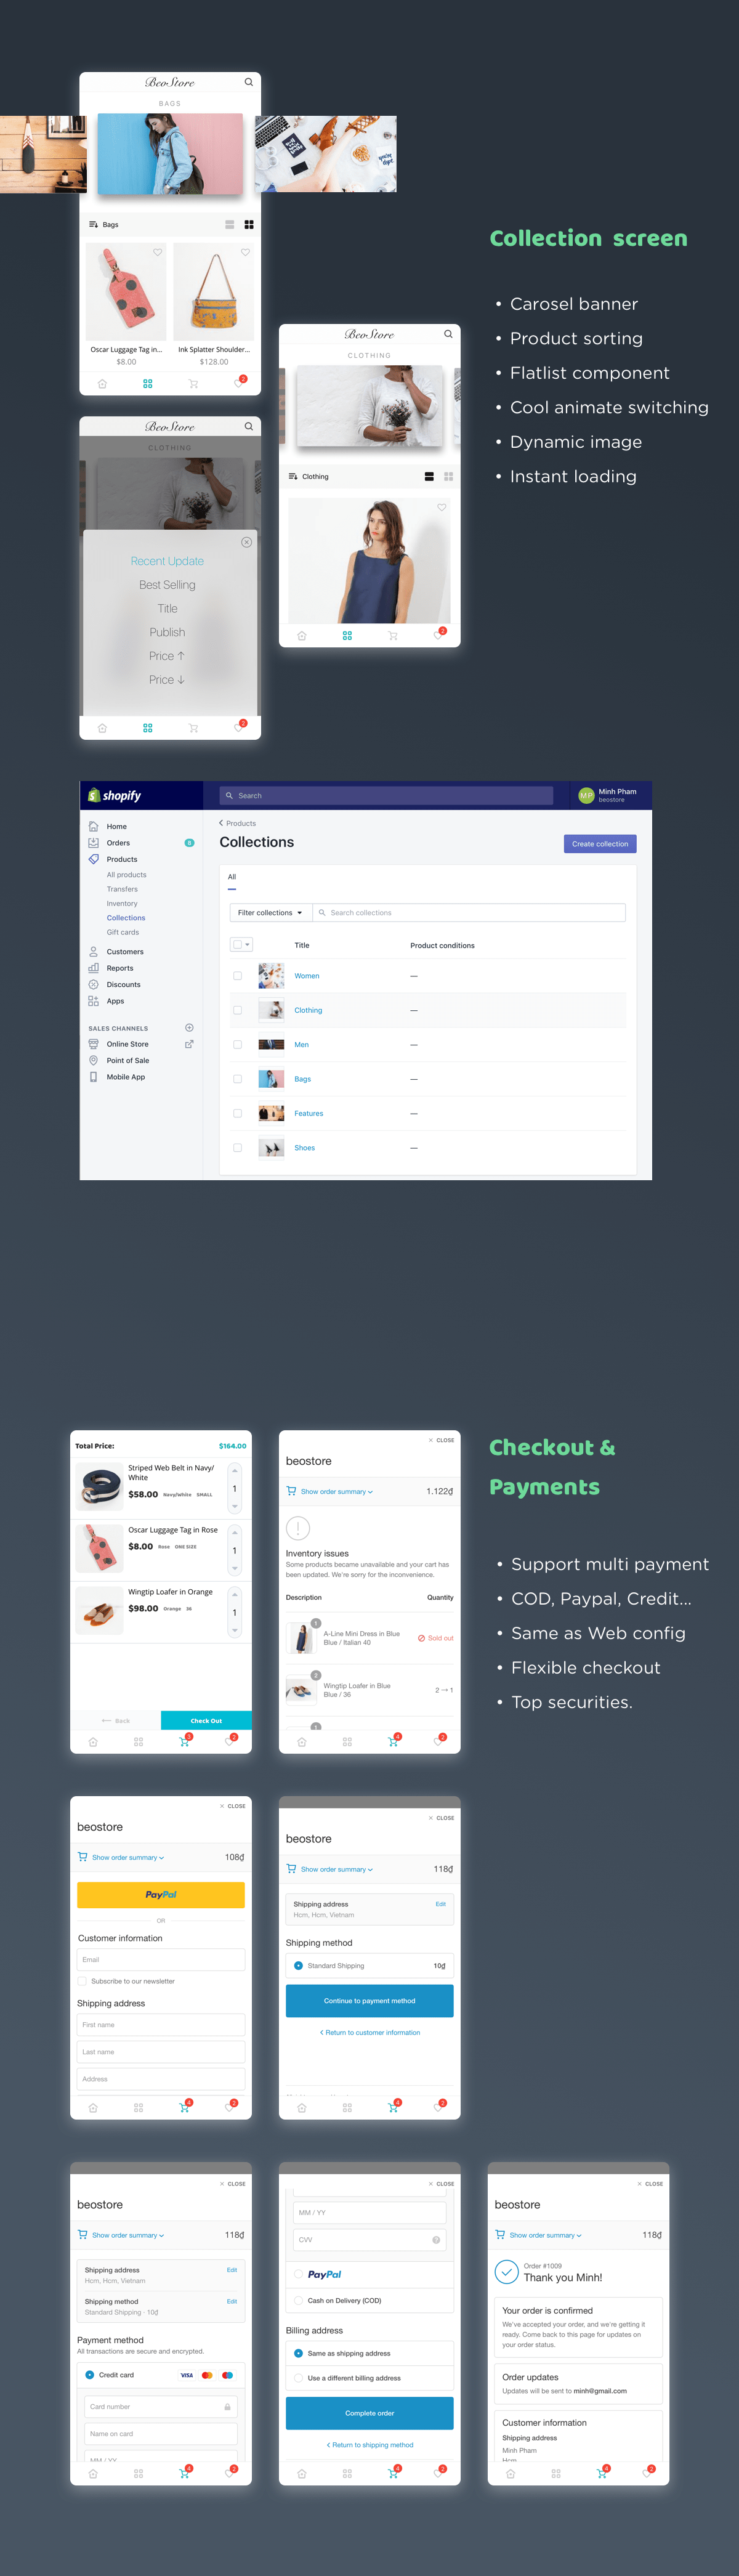 Mstore Shopify - Complete React Native template for e-commerce - 8